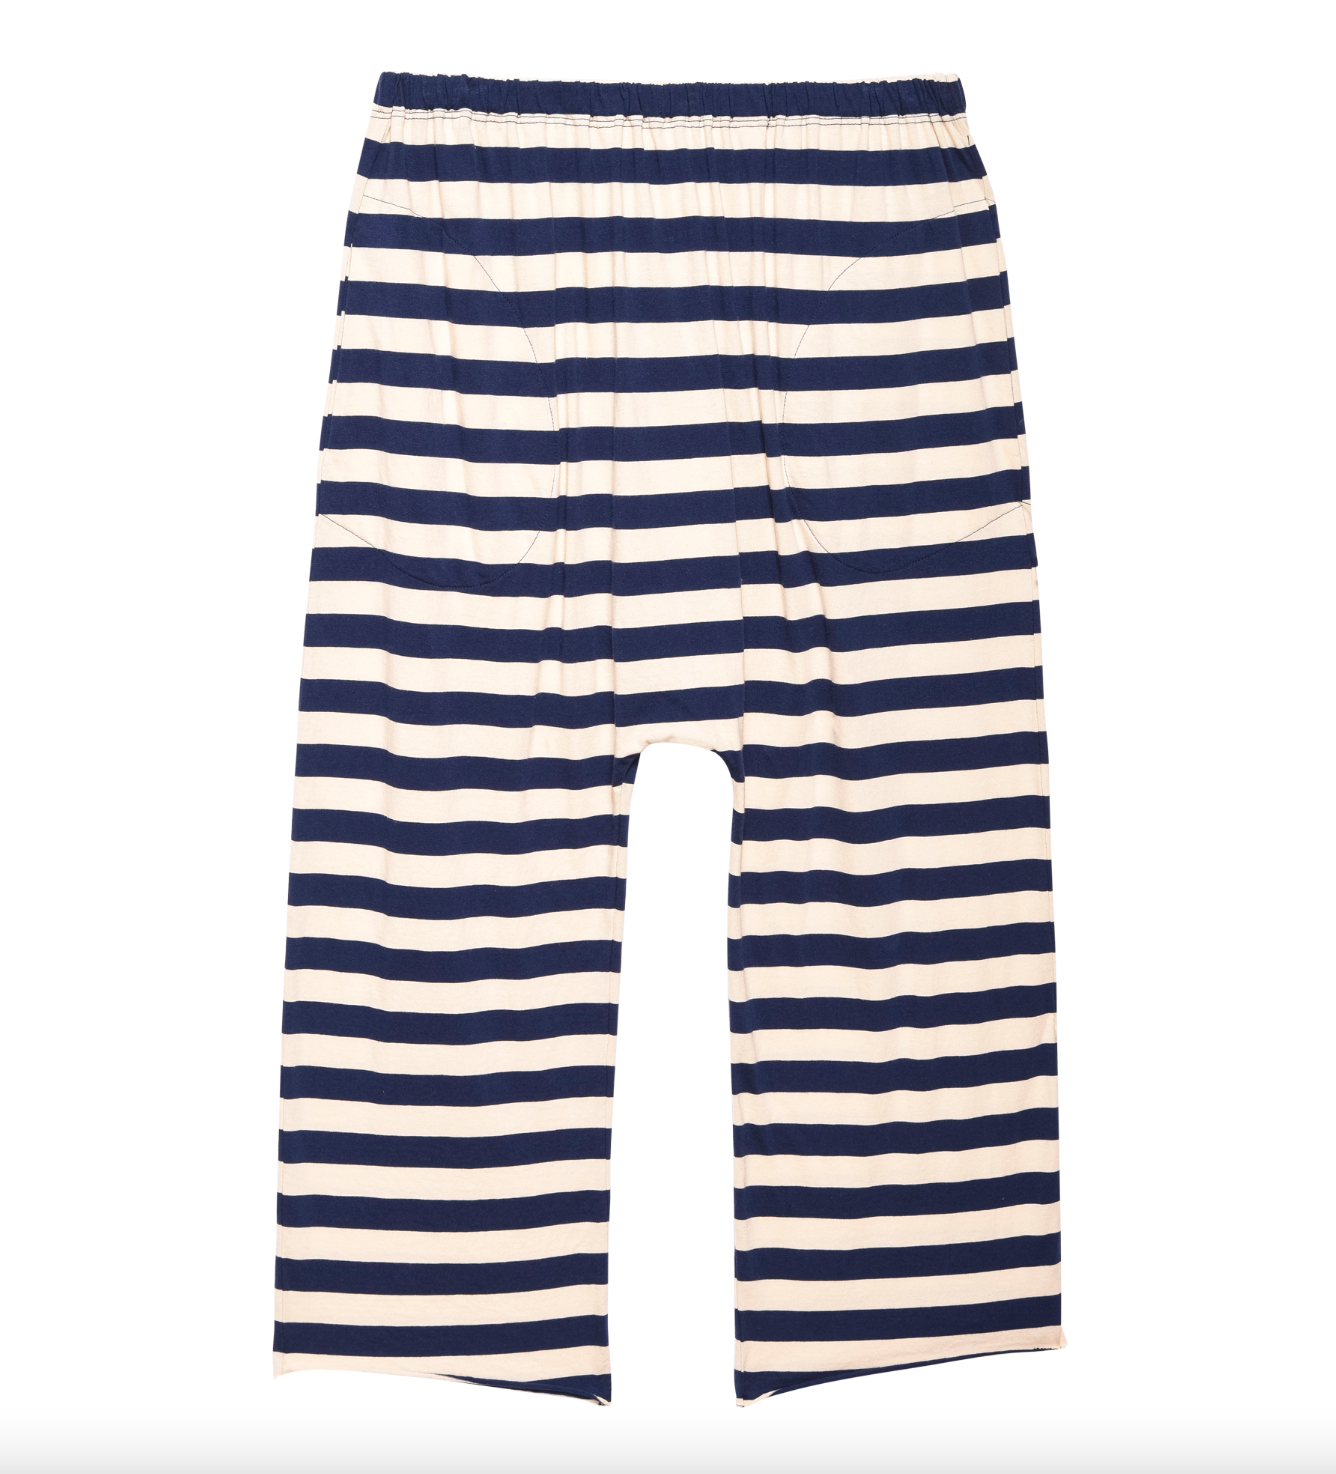 A pair of relaxed-fit, wide-leg pants with horizontal navy and white stripes evokes the laid-back charm of a Scottsdale bungalow. The JERSEY CROP NAVY AND CREAM SCHOLAR STRIPE from The Great Inc. features an elastic waistband for comfort and is styled against a white background.